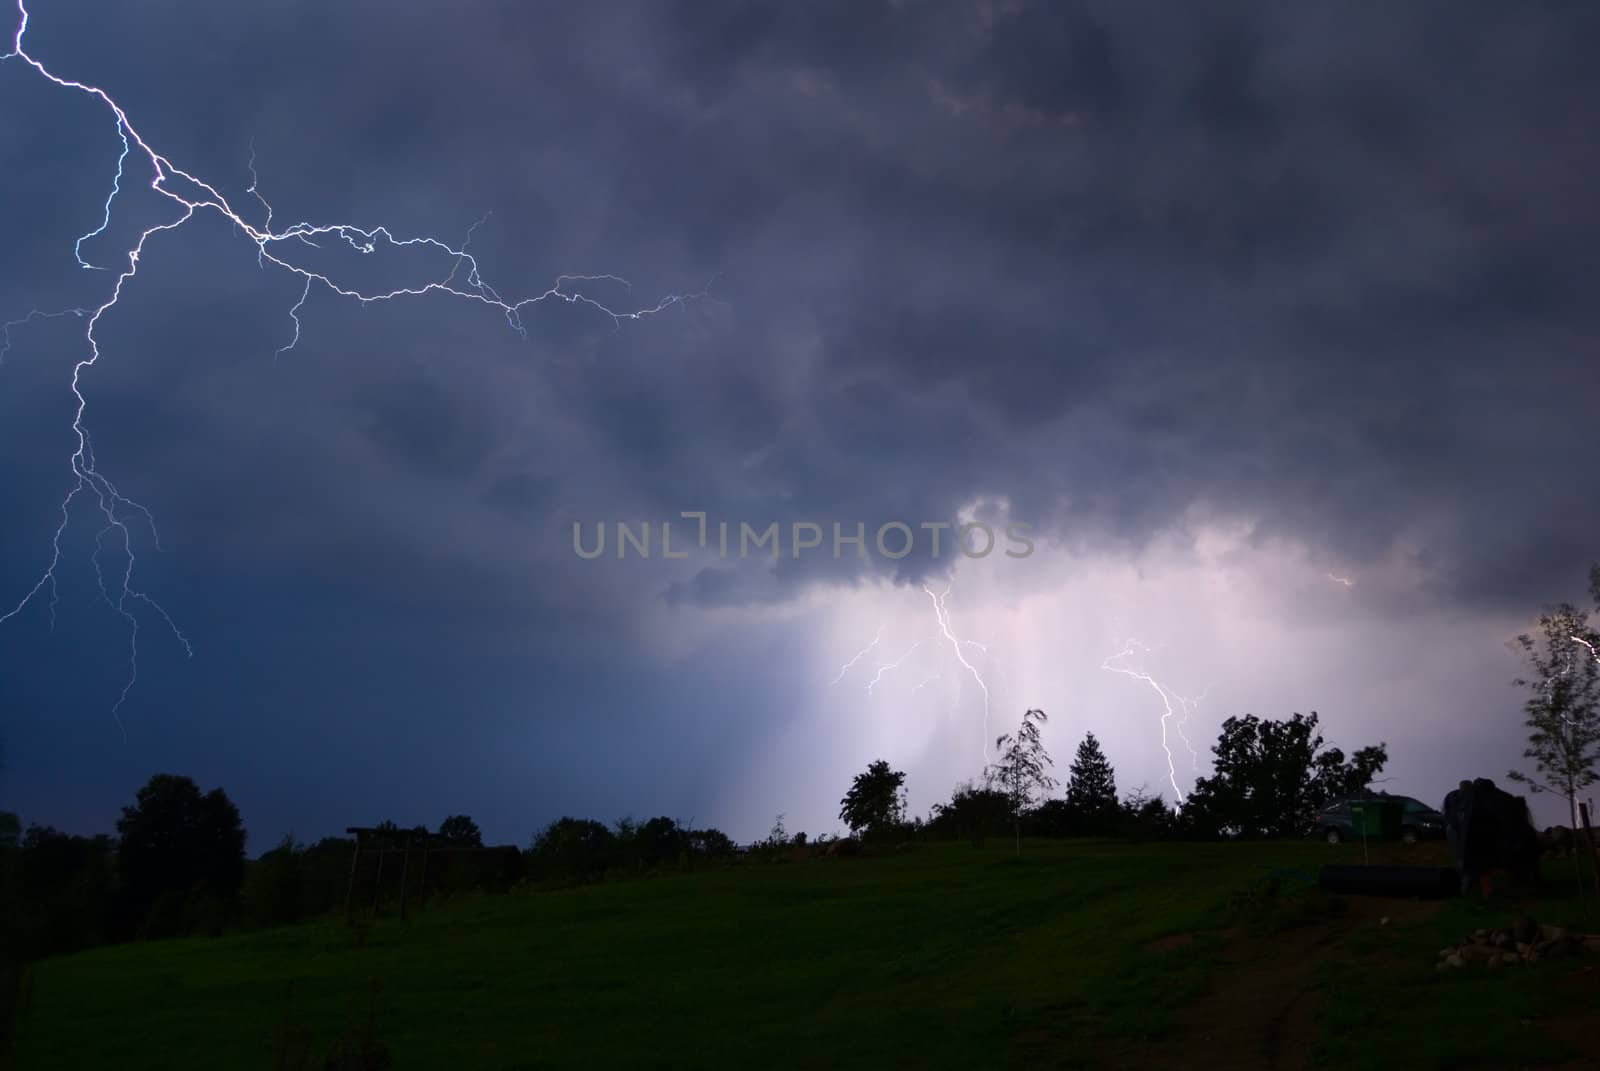 Thunderstorm in Poland - 08.2007